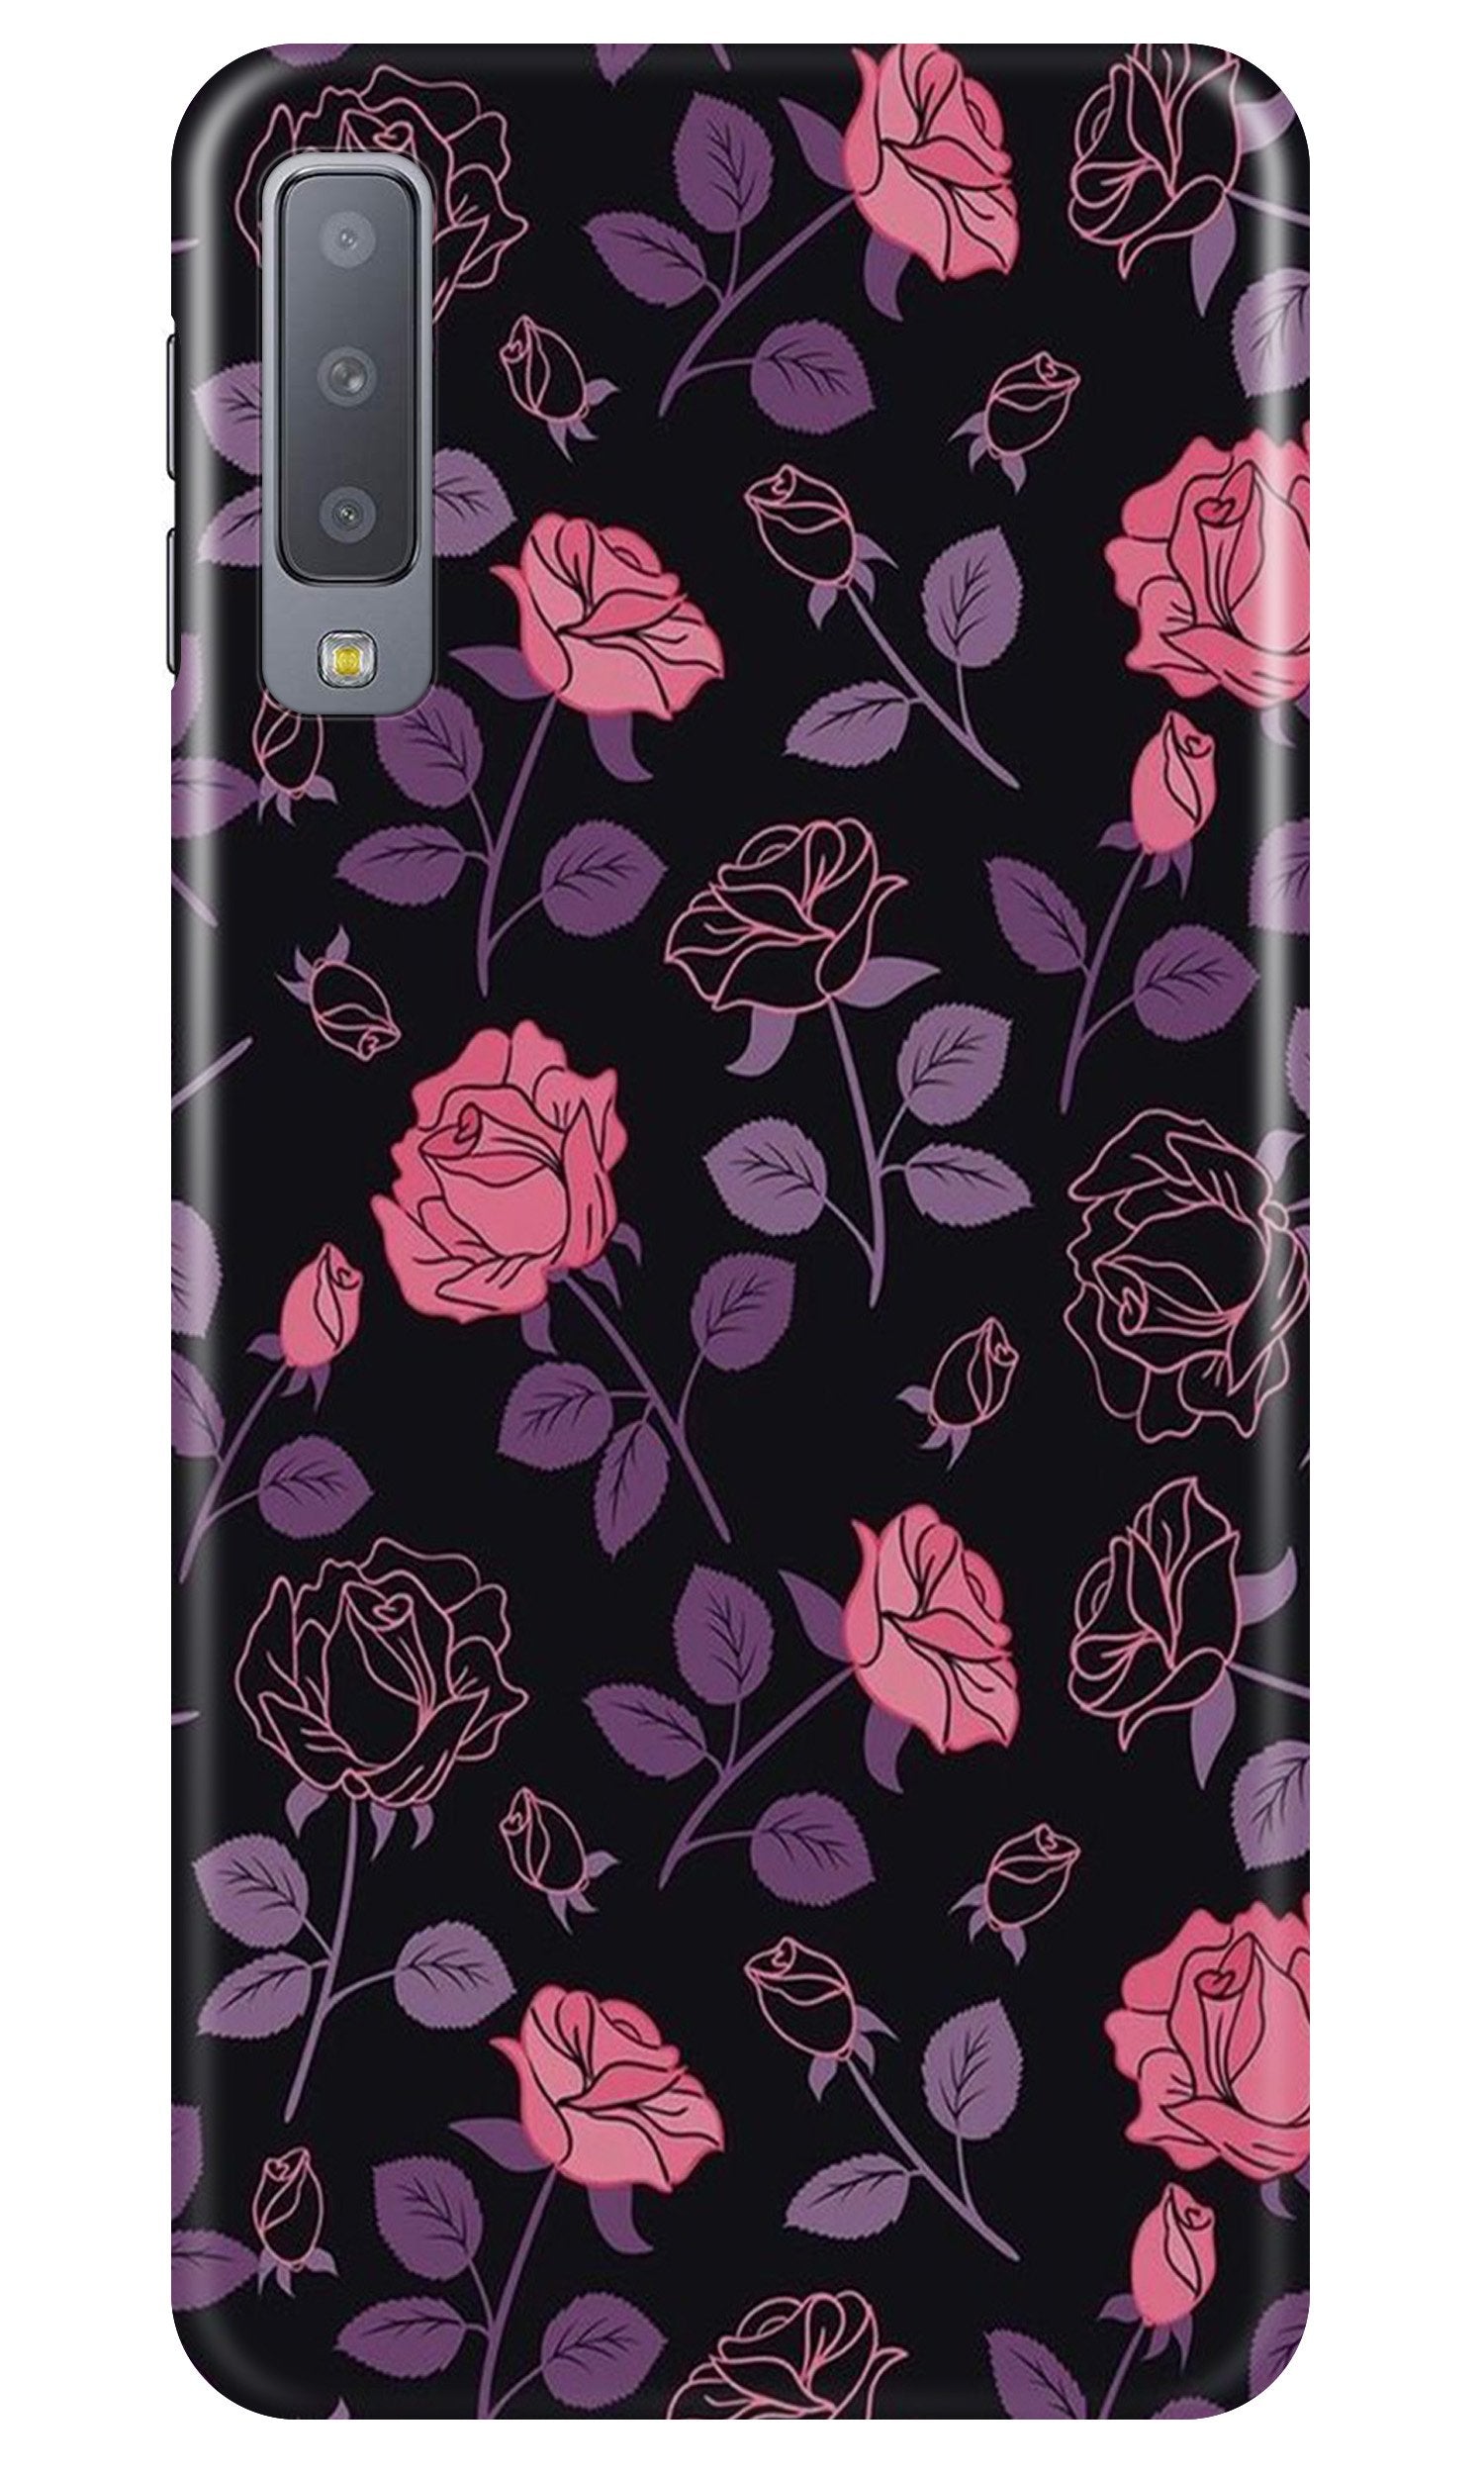 Rose Black Background Case for Galaxy A7 (2018)